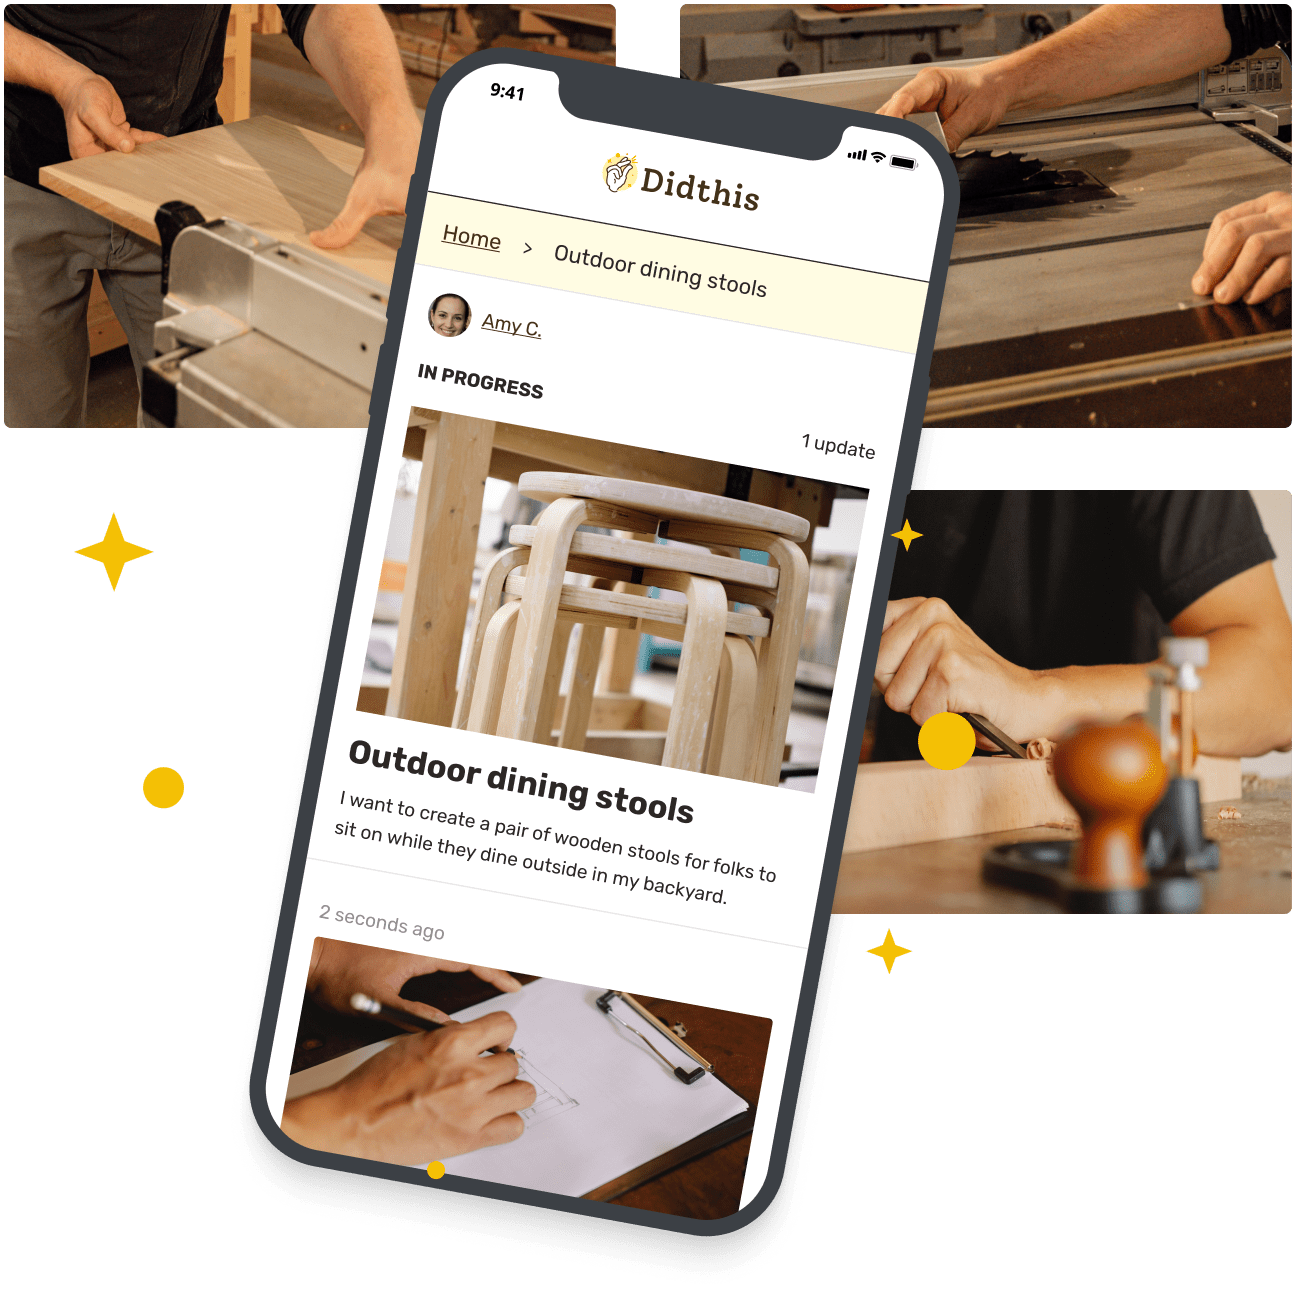 An iPhone screenshot showing the DidThis application featuring a woodworking project in progress